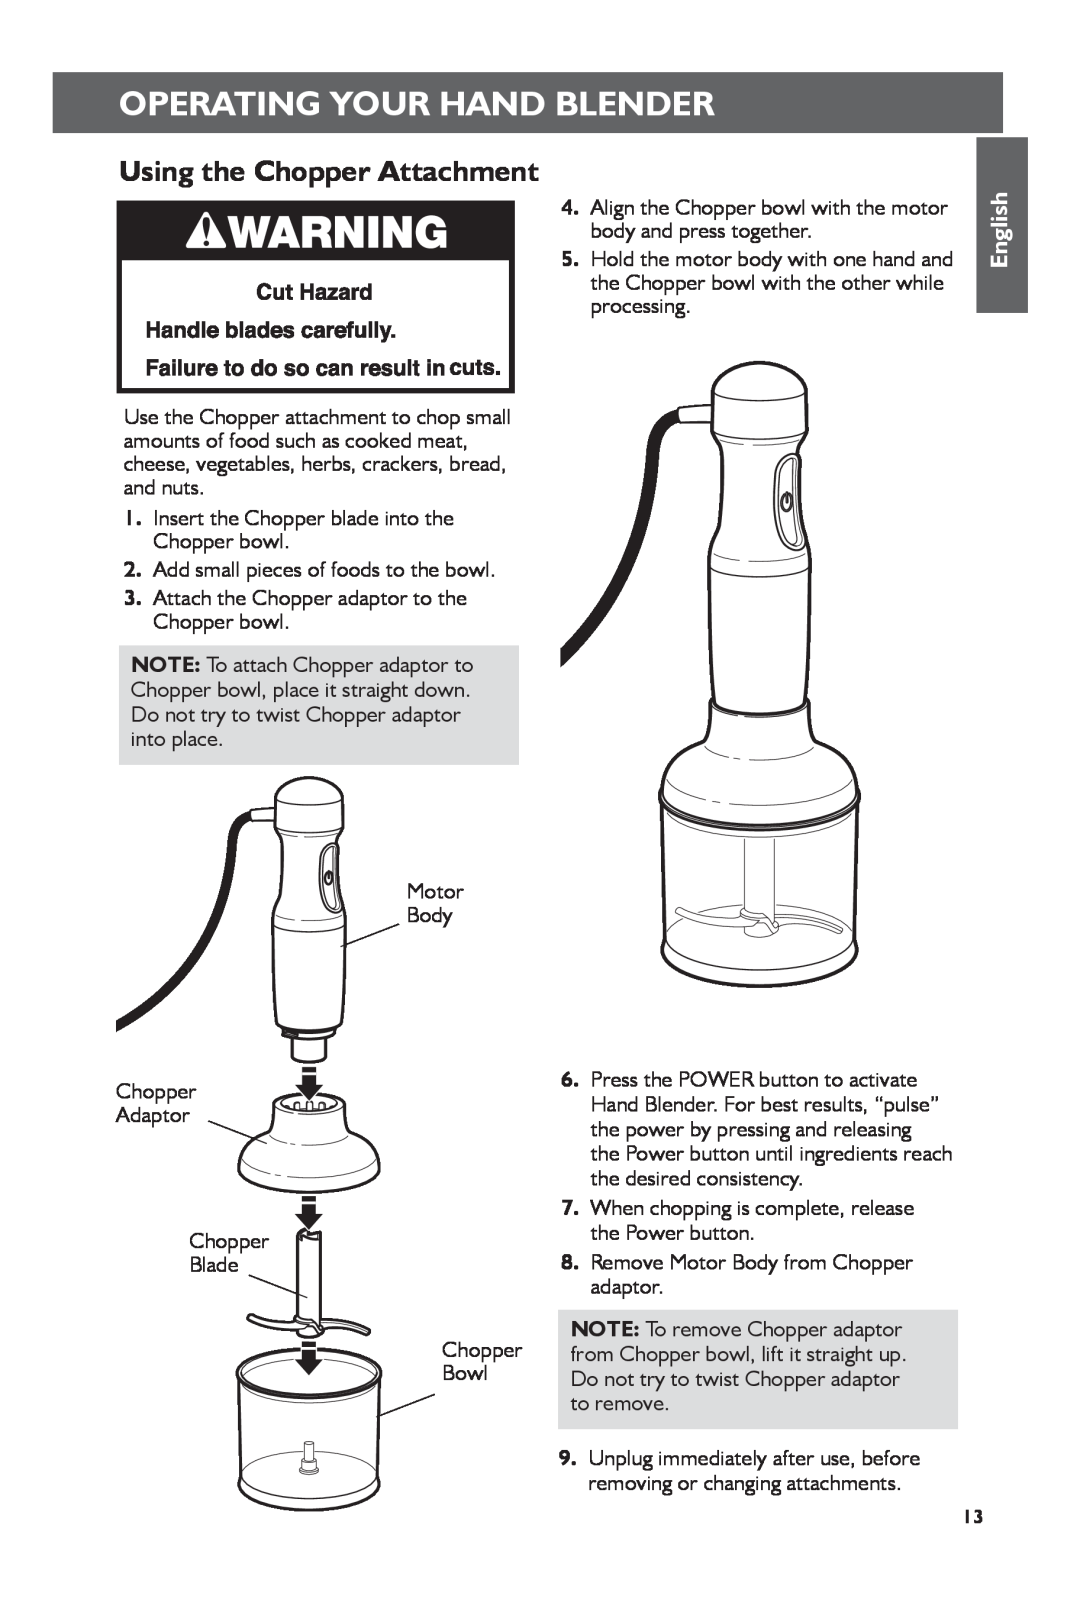 KitchenAid 5KHB2571 manual Using the Chopper Attachment, Operating Your Hand Blender, English 